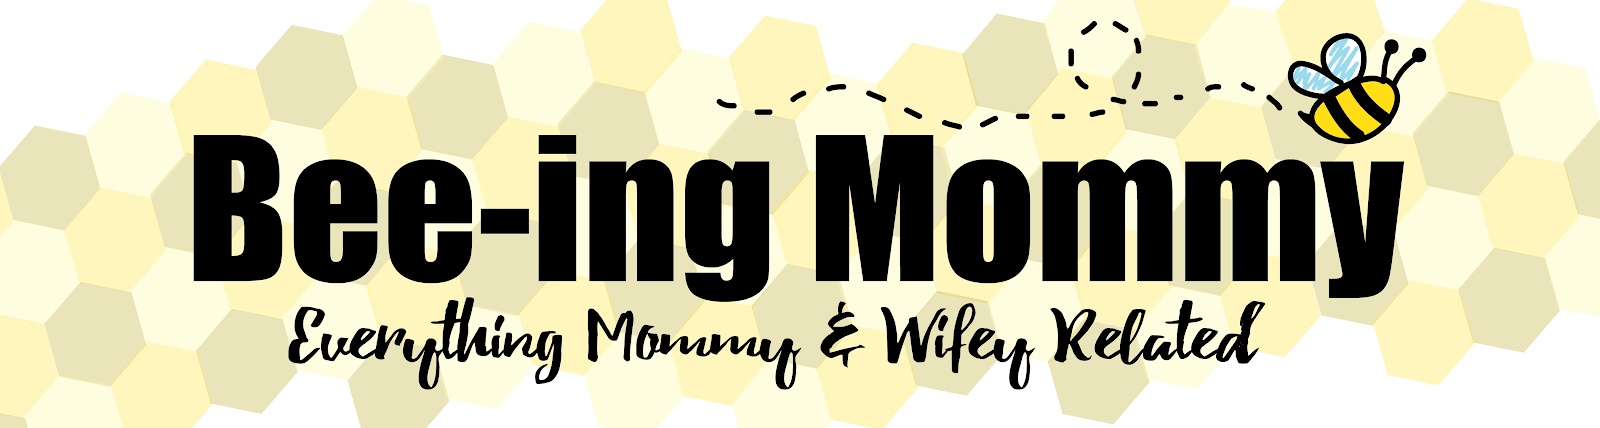 Bee-ing Mommy Blog